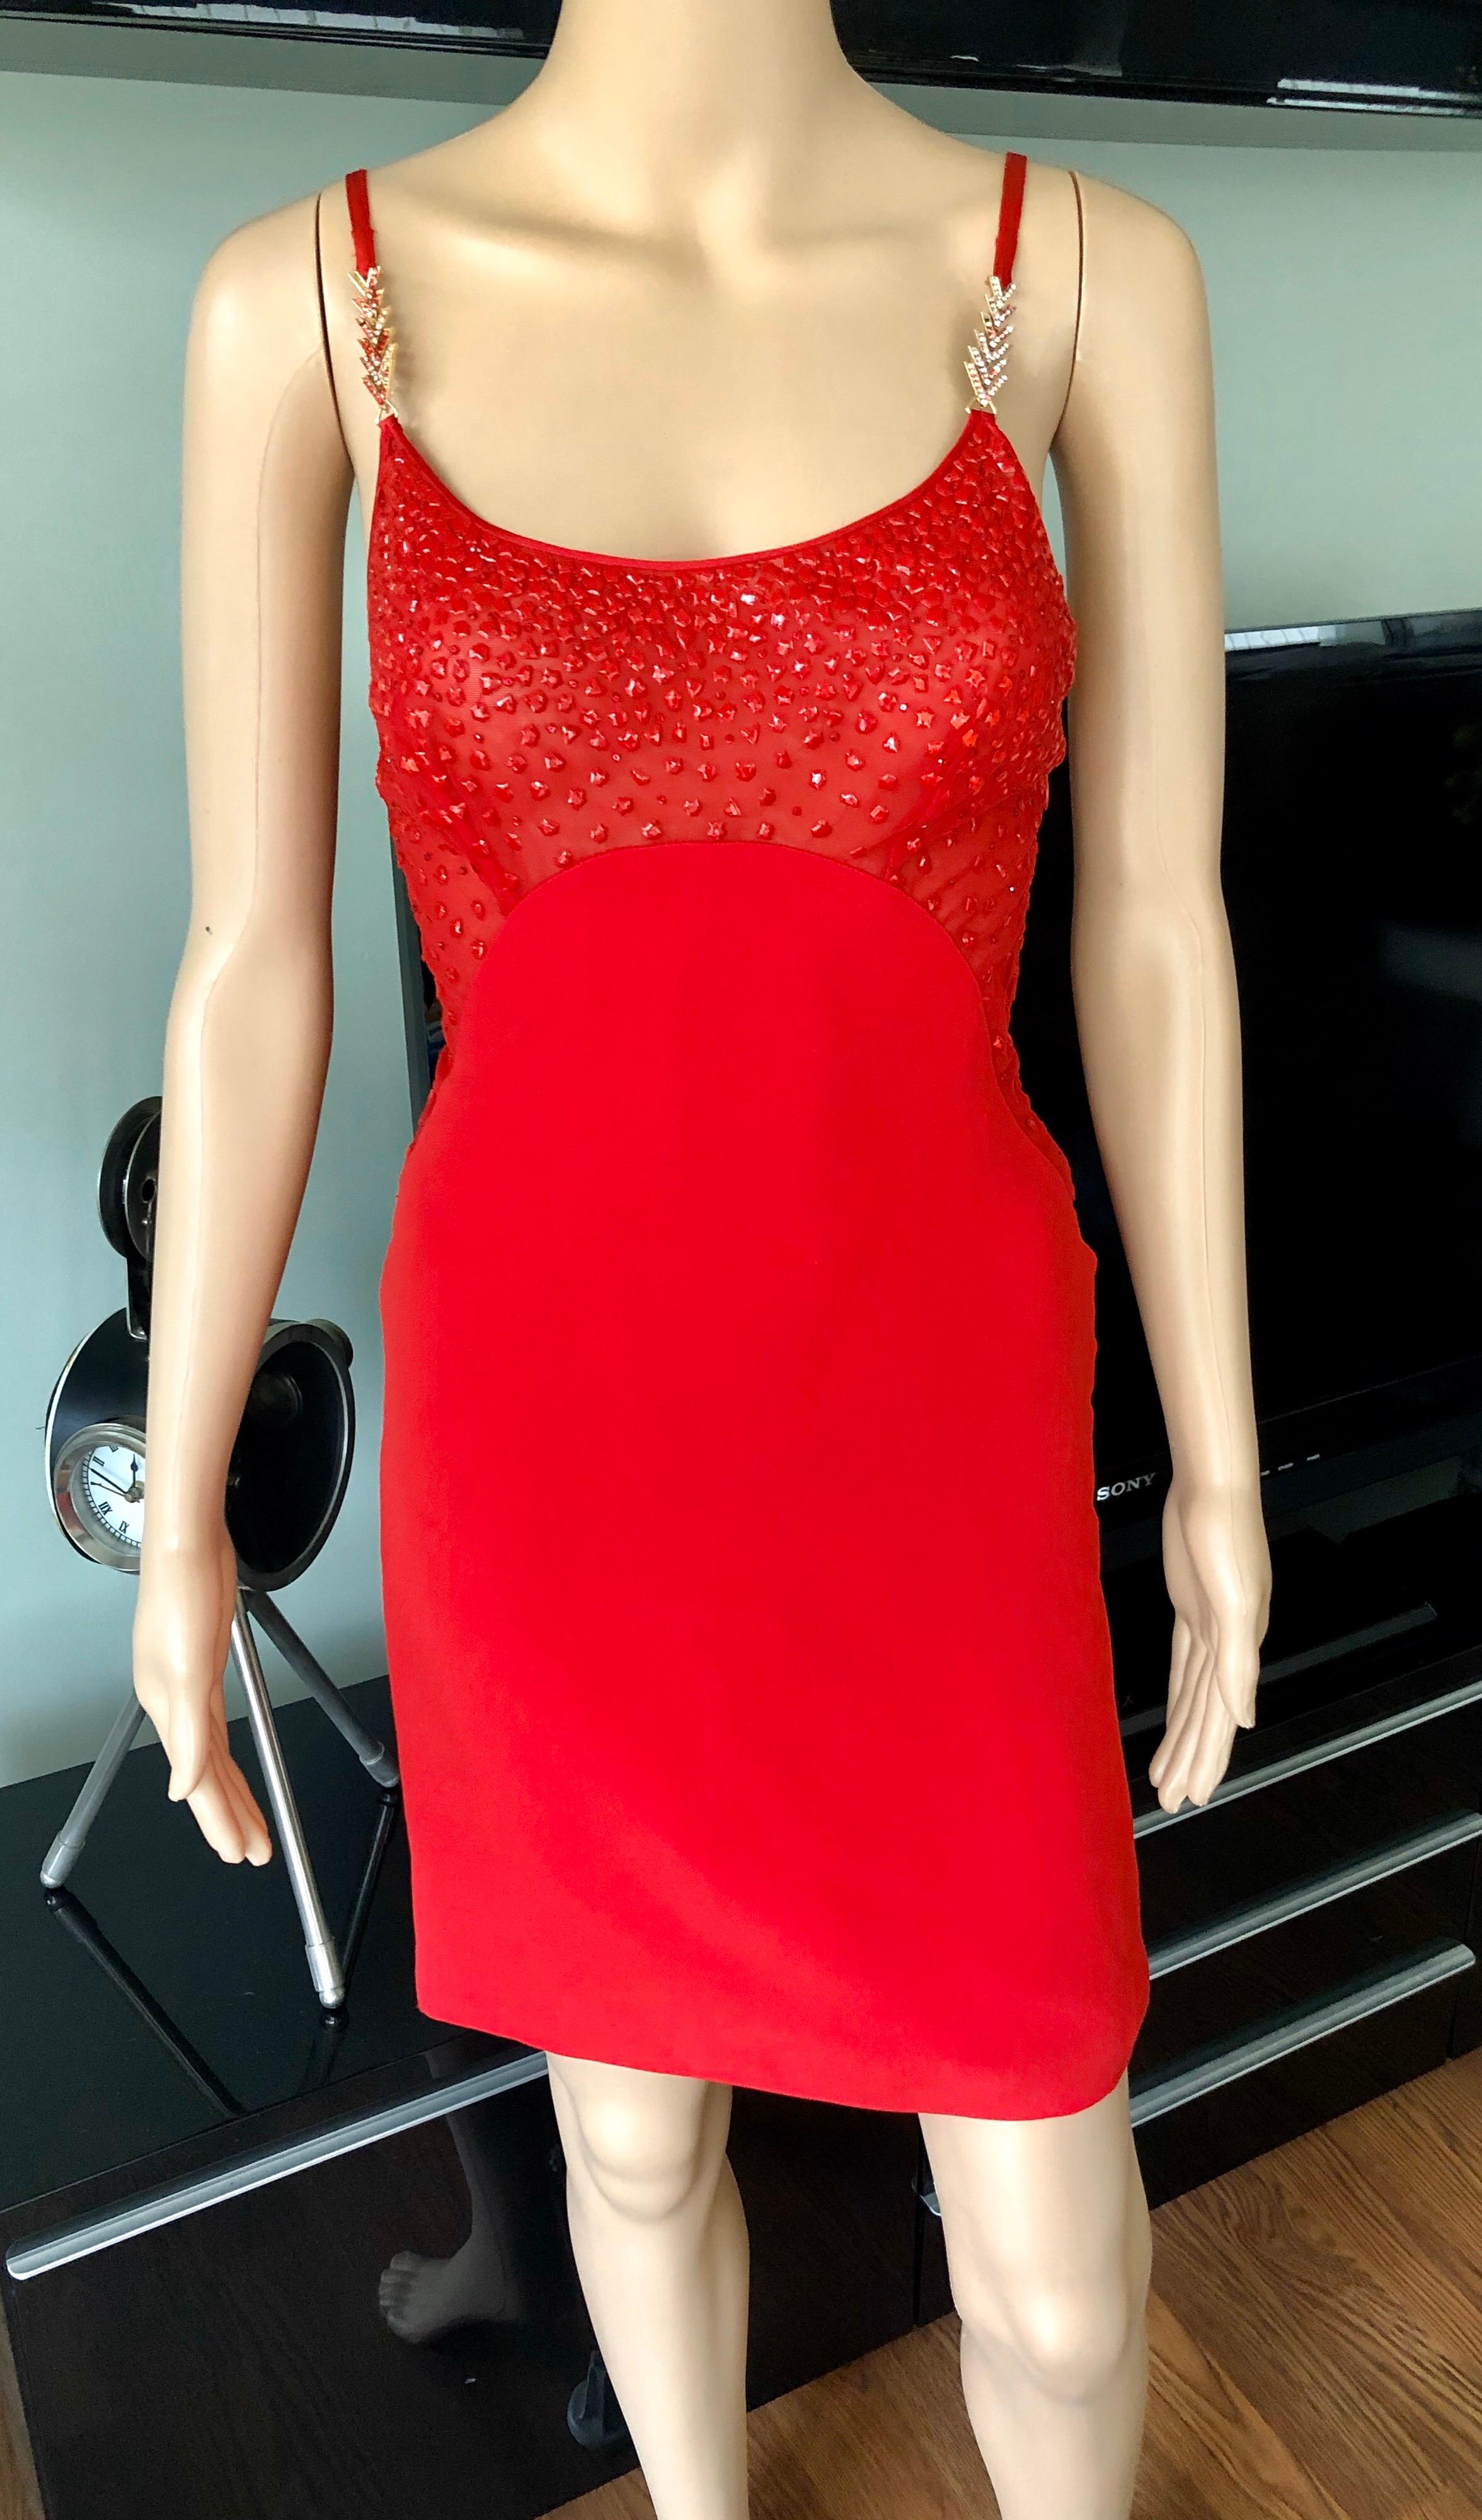 Gianni Versace F/W 1996 Runway Vintage Embellished Sheer Red Evening Mini Dress IT 38

Gianni Versace couture evening dress featuring sheer top, embellished straps, square neck and concealed zip closure at side. 

Good condition - minor missing